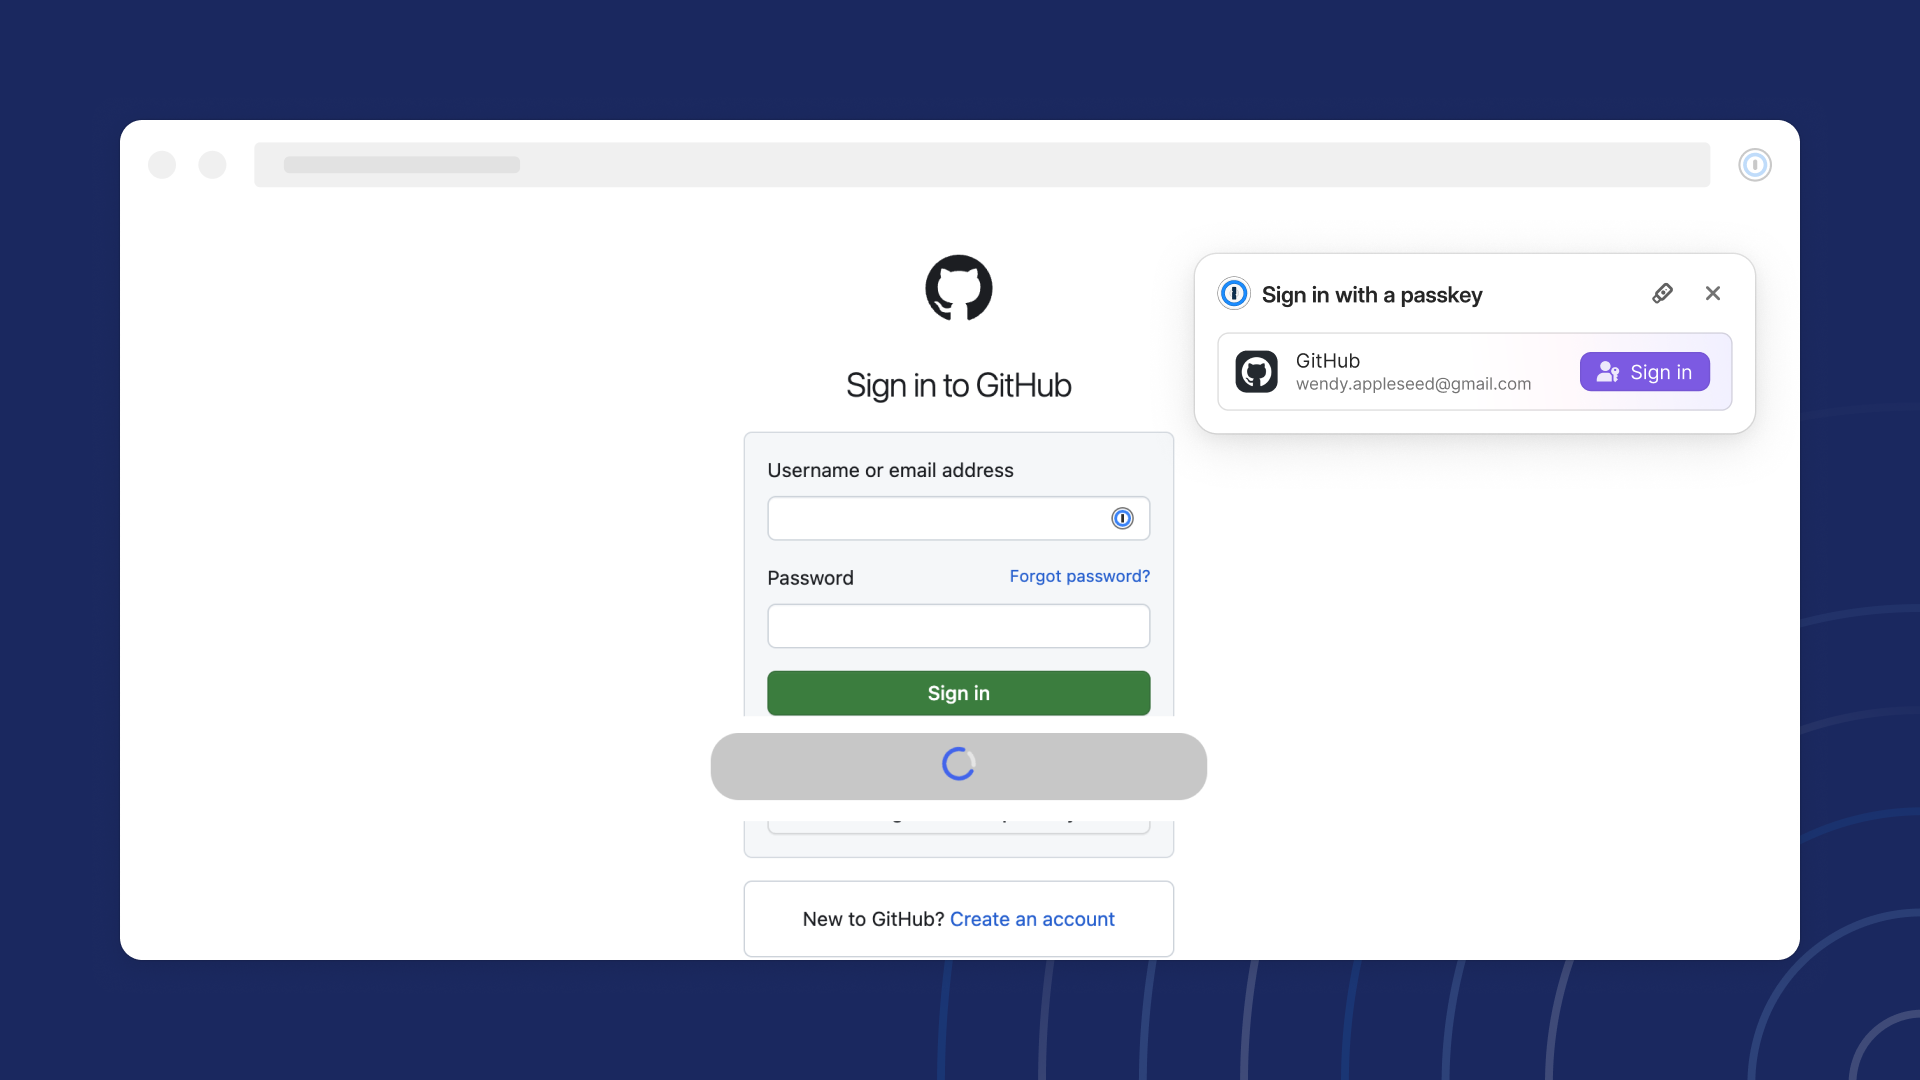 Image showing a passkey being used to sign in to Github